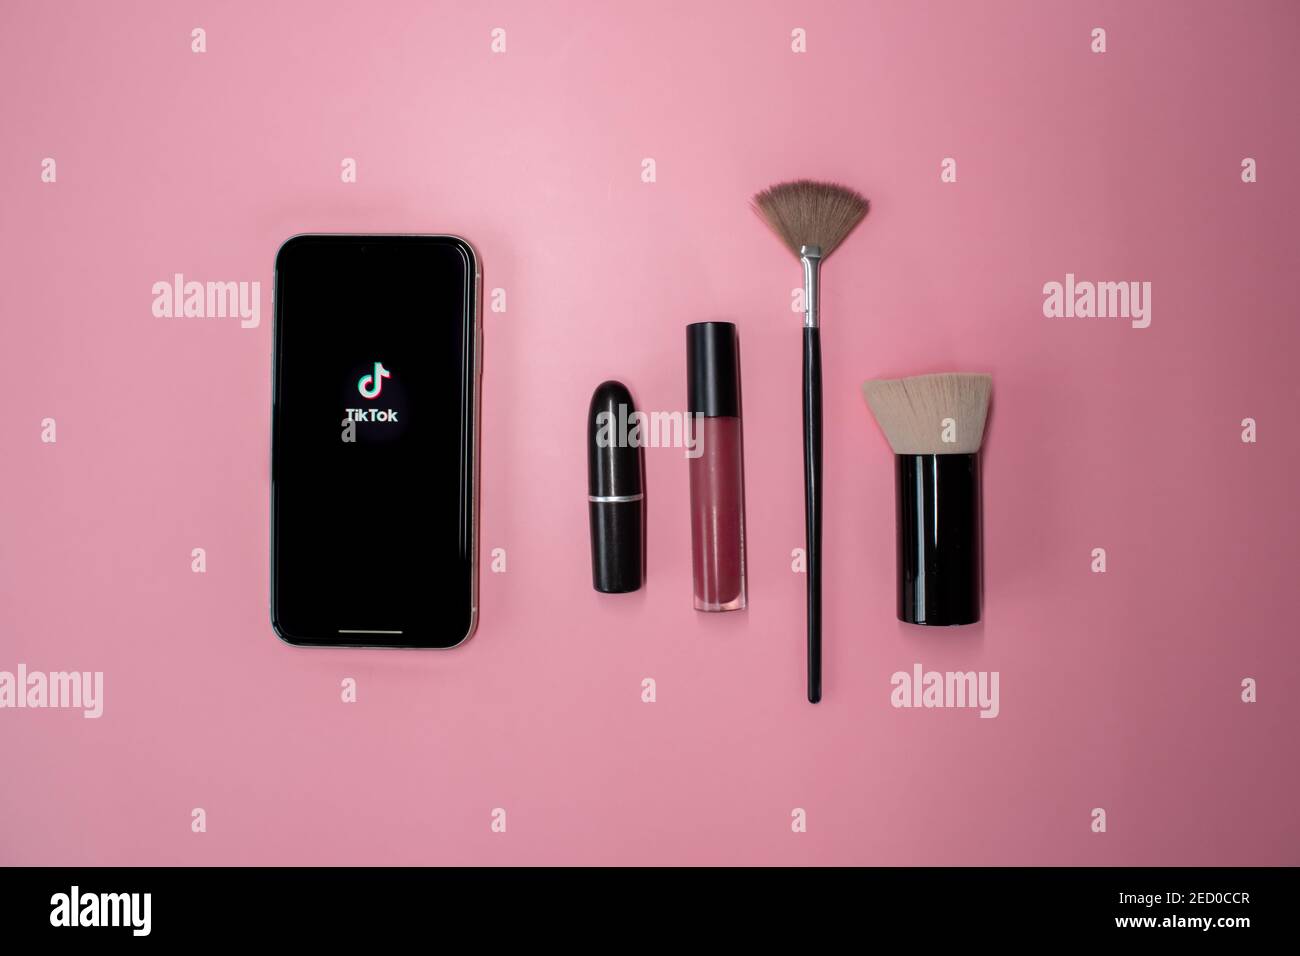 London, United Kingdom - February 14, 2021: iPhone showing the popular social media app Tik Tok with cosmetic makeup brushes and lipstick. Stock Photo